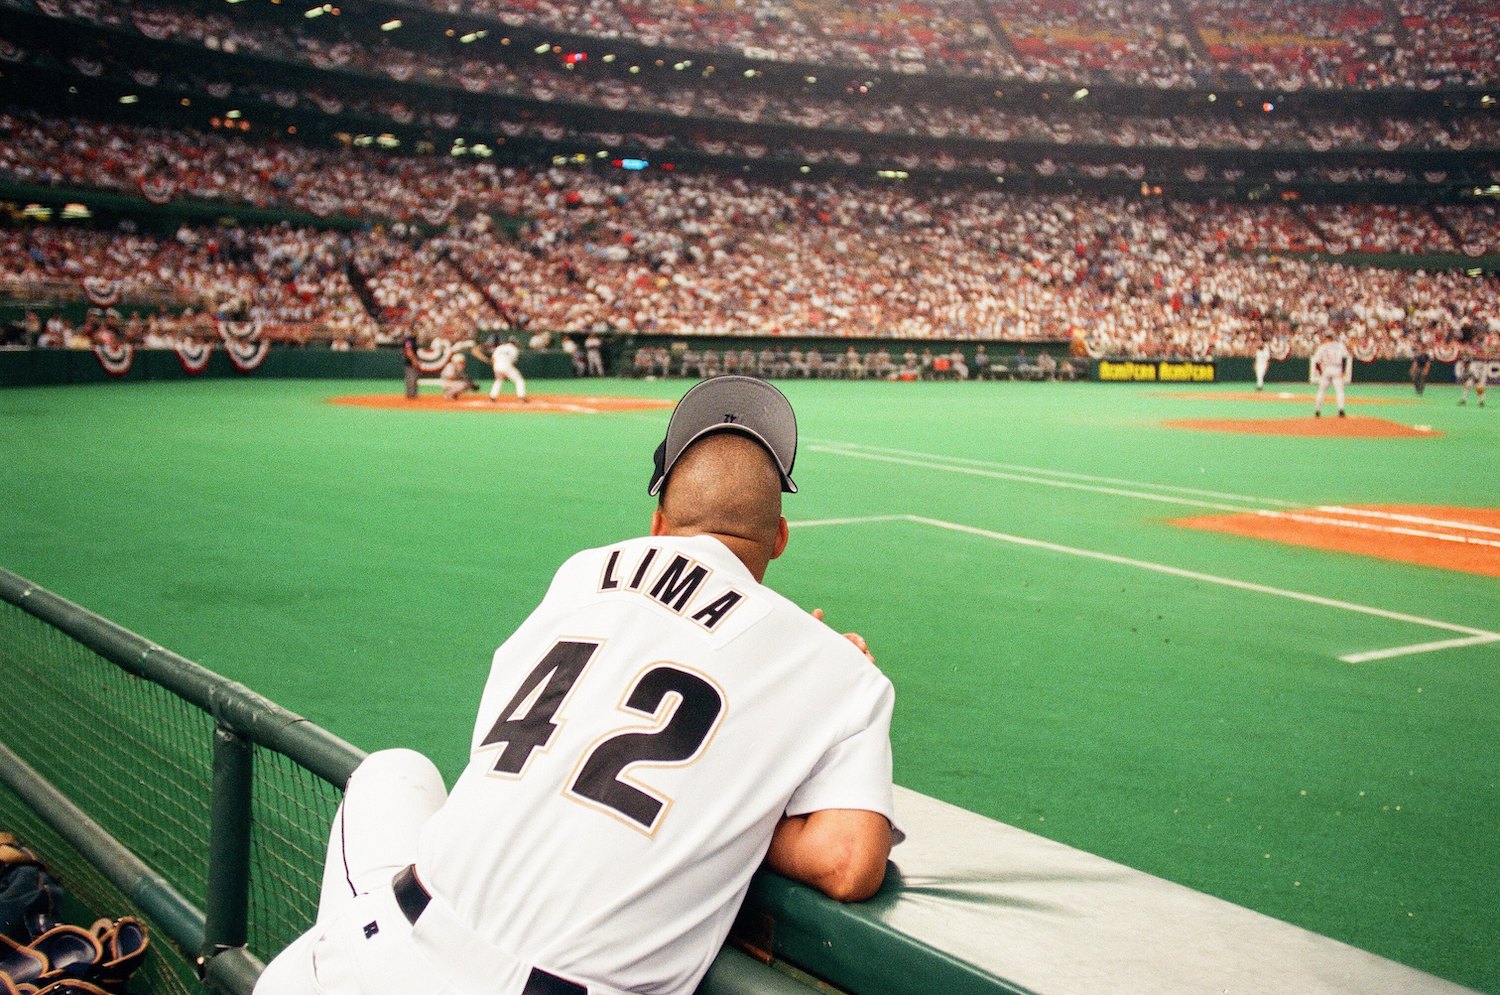 The Tragic Death of Former All-Star Pitcher Jose Lima